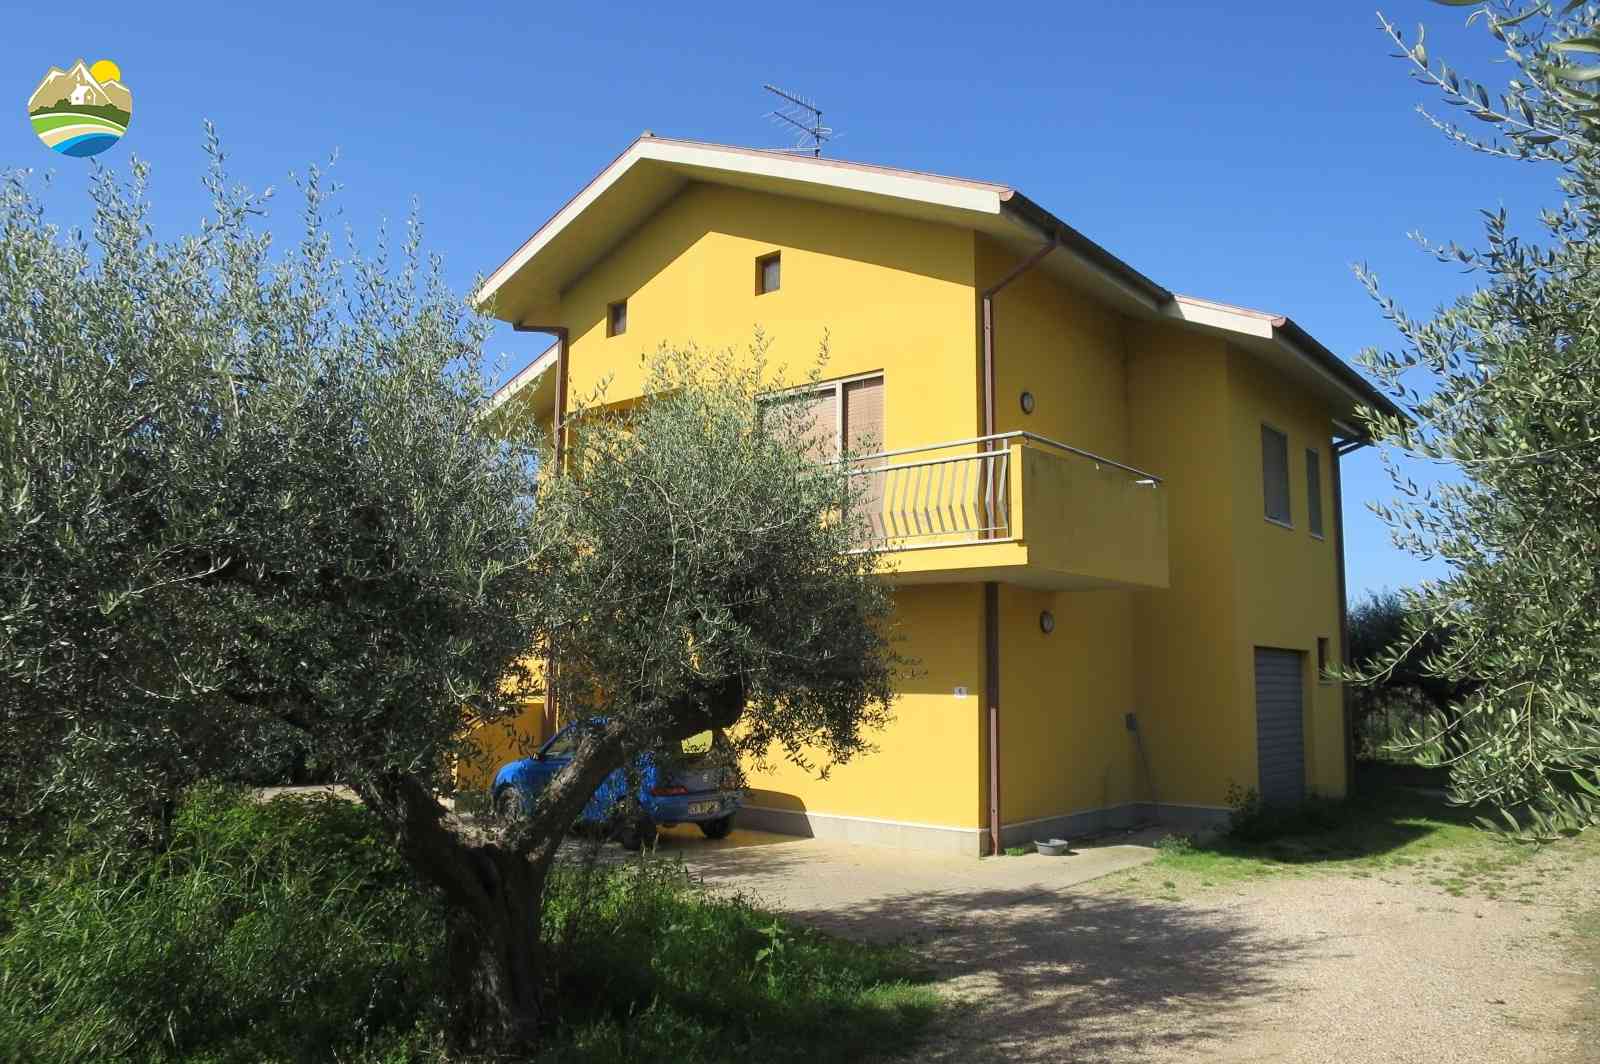 Country Houses Country Houses for sale Elice (PE), Casa del Sole - Elice - EUR 282.245 570